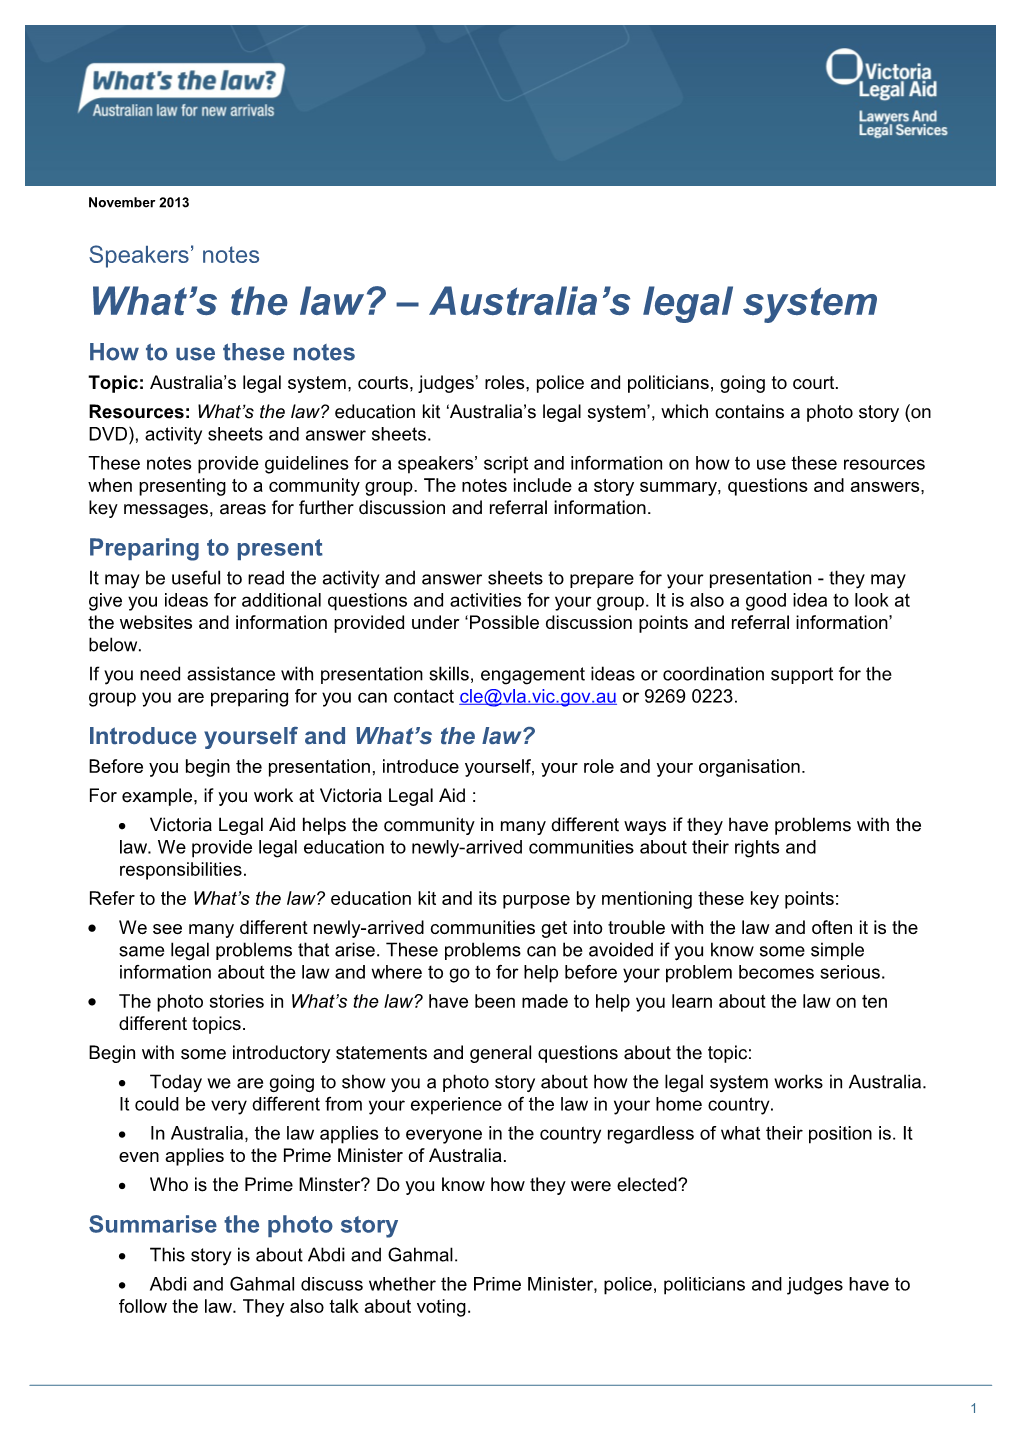 Speakers' Notes What's the Law Australia's Legal System